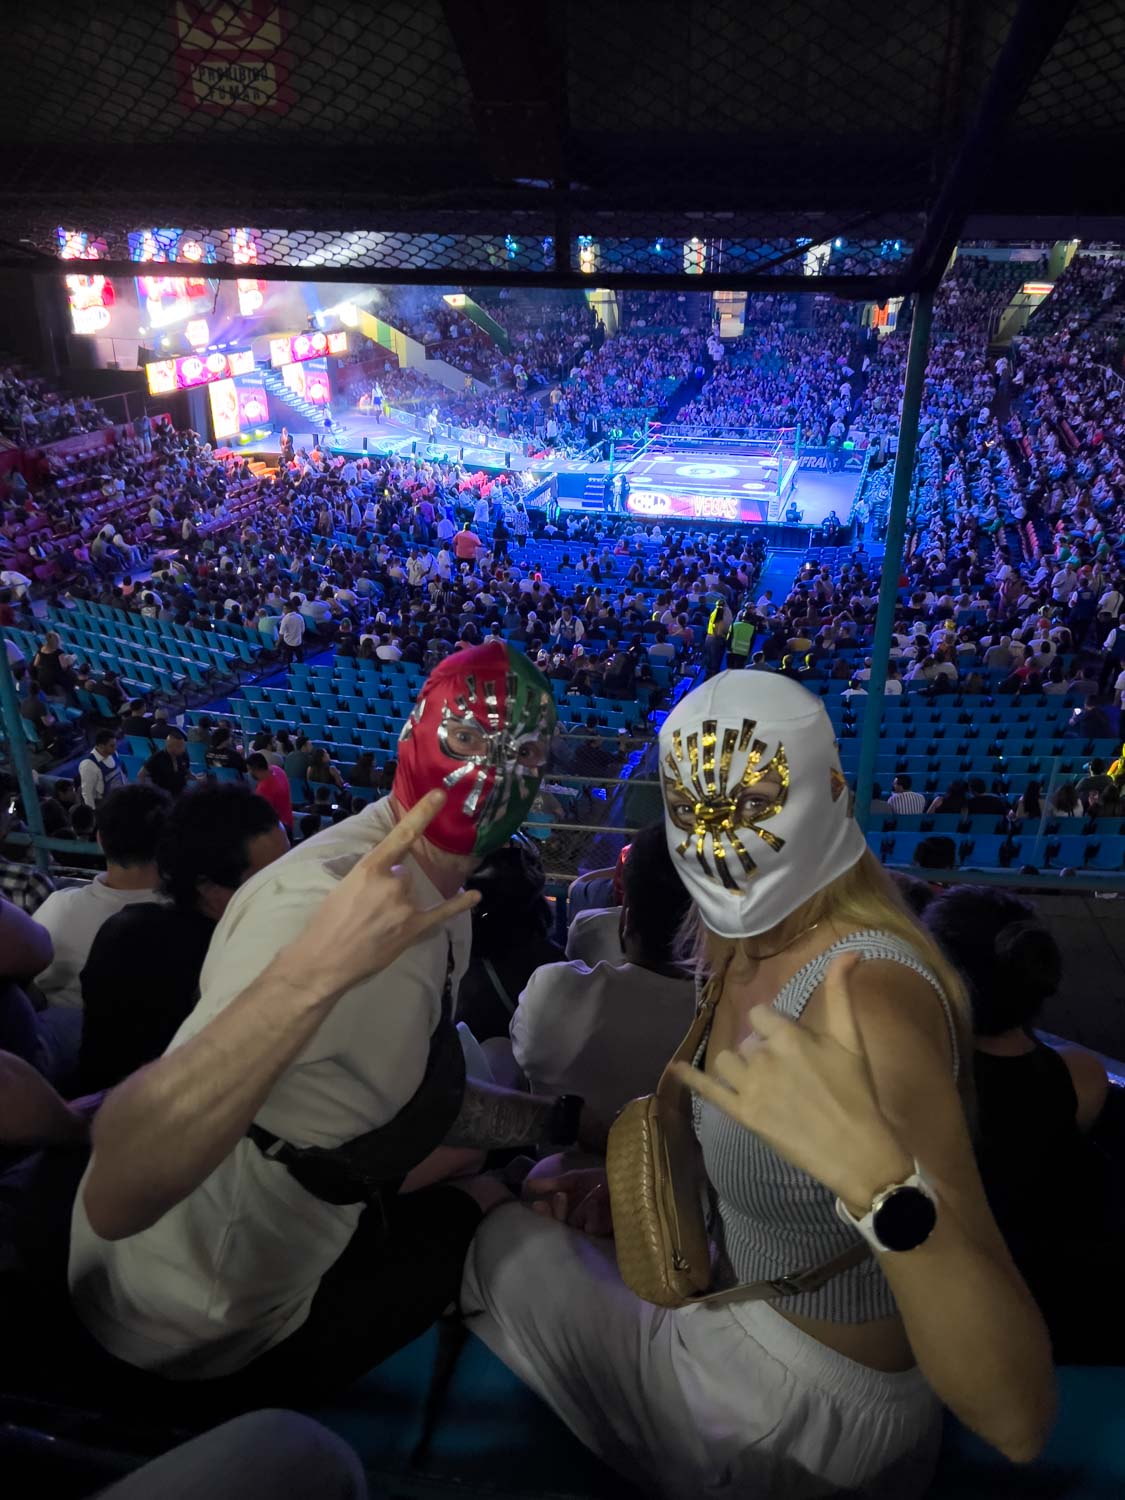 Bloggers Mal and Robin at Lucha Libre show in CDMX.